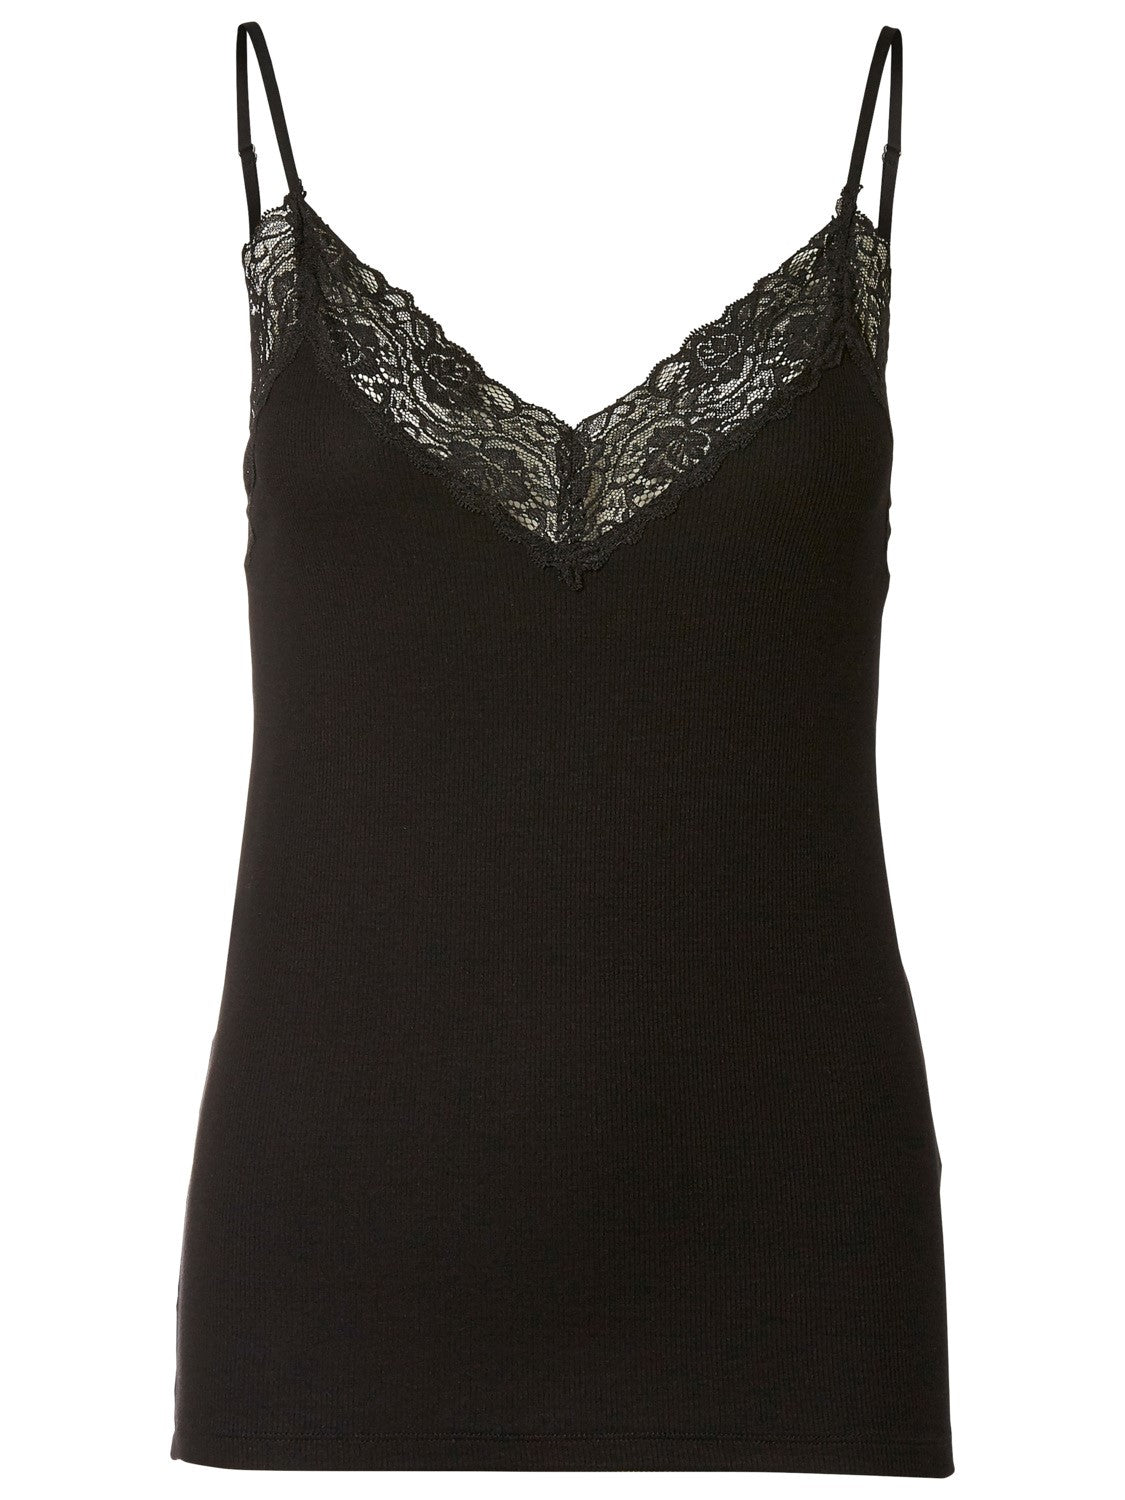 Selected Femme Mio rib lace singlet black